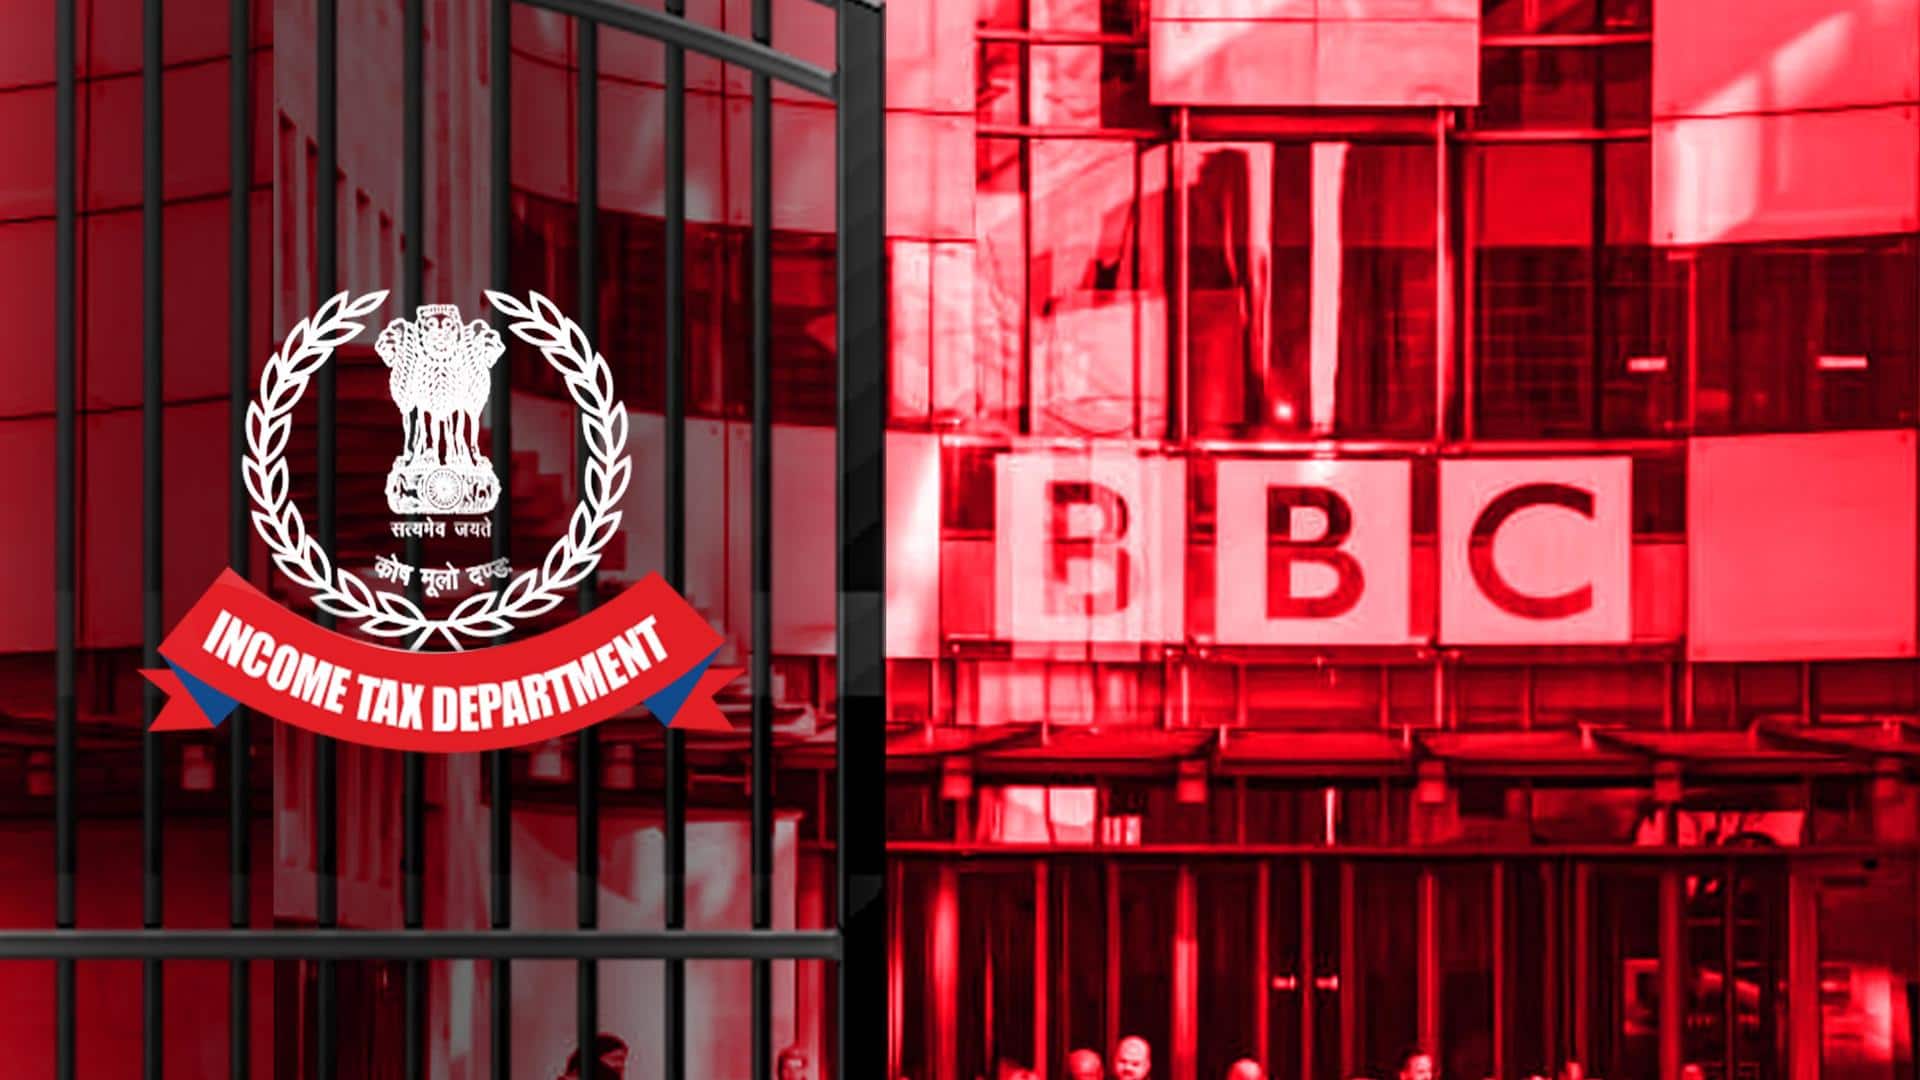 BBC admits to paying lower taxes in India: Report